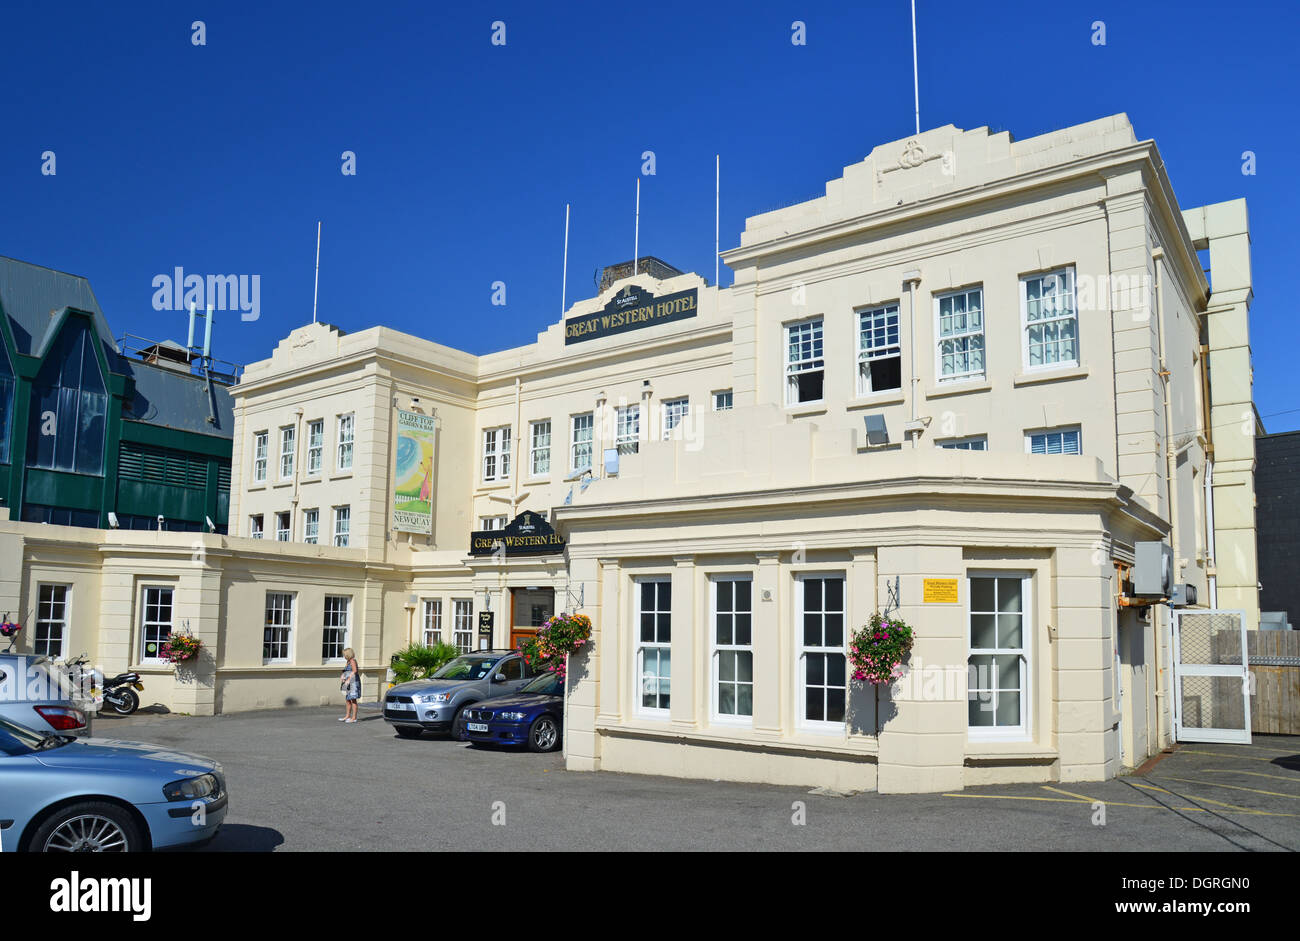 Great Western Hotel, Cliff Road, Newquay, Cornwall, Angleterre, Royaume-Uni Banque D'Images